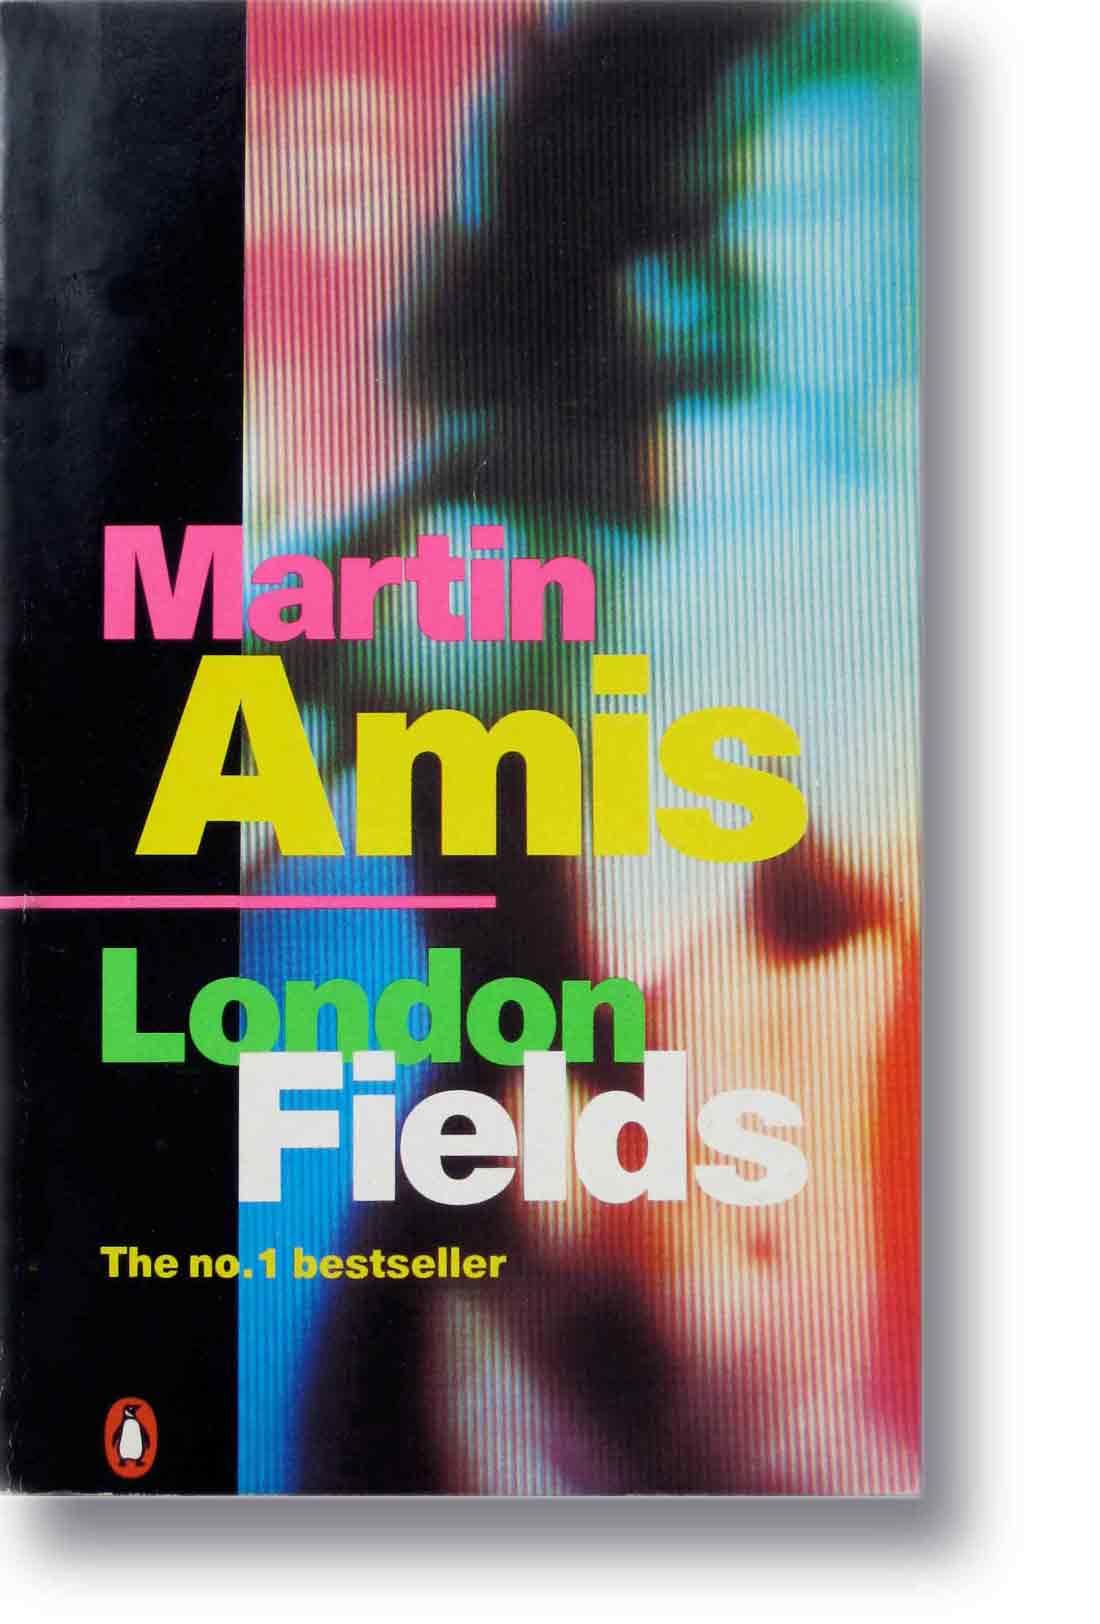 Penguin book cover for Marin Amis's London Fields designed by ideology.uk.com